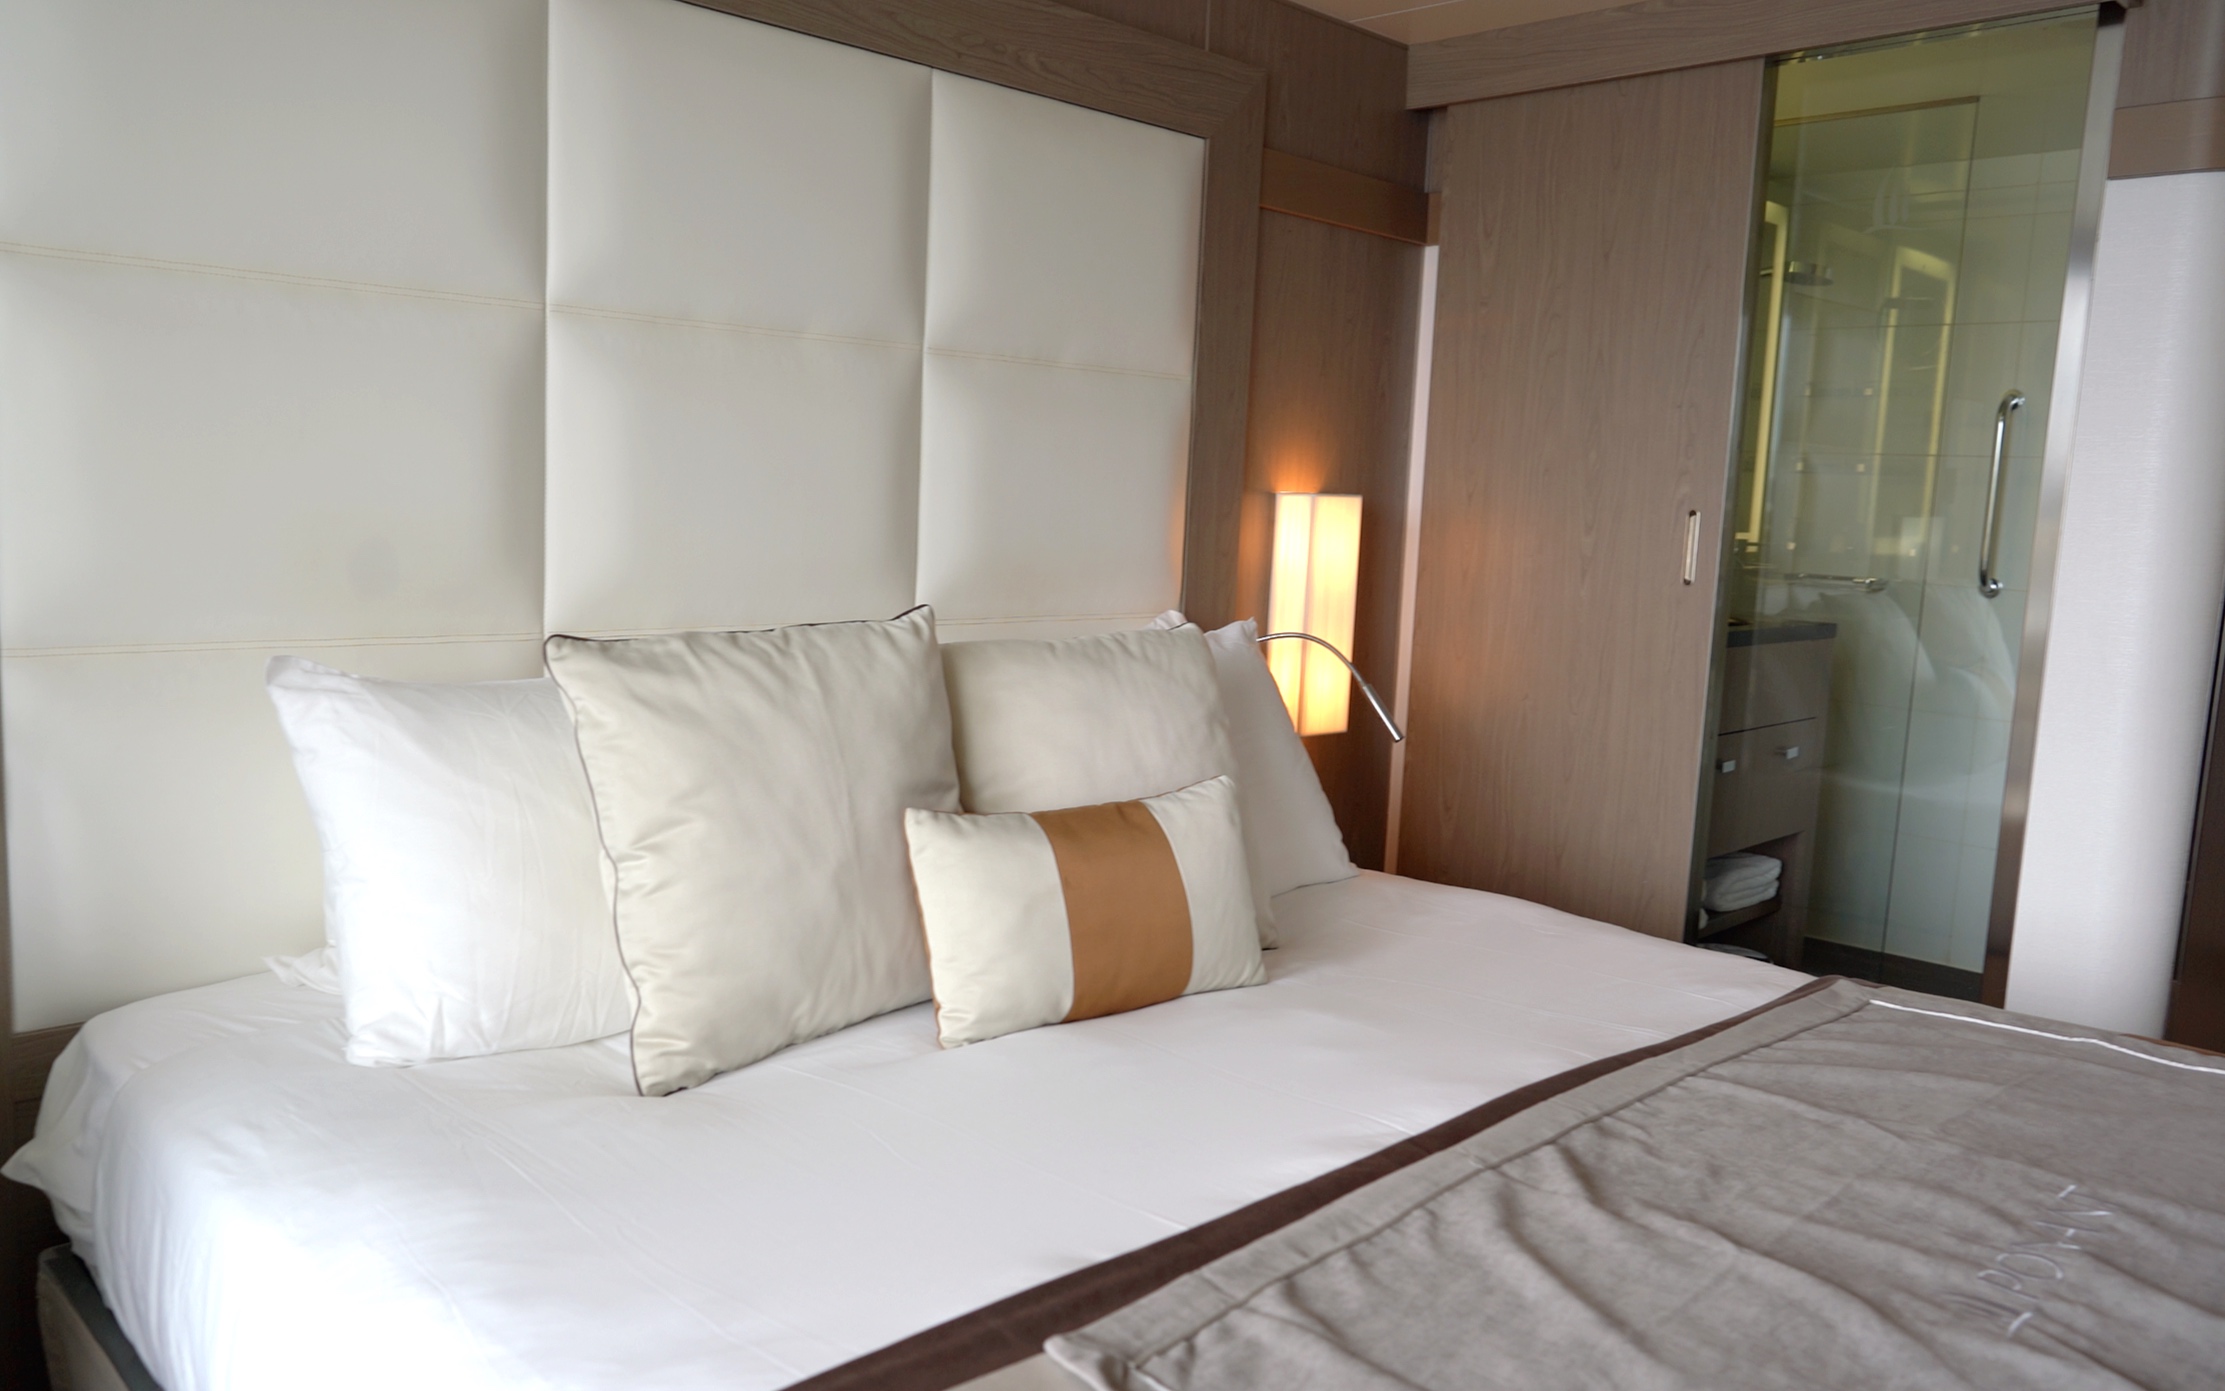  Comfortable looking bed - you can see the glass wall to the shower room. 